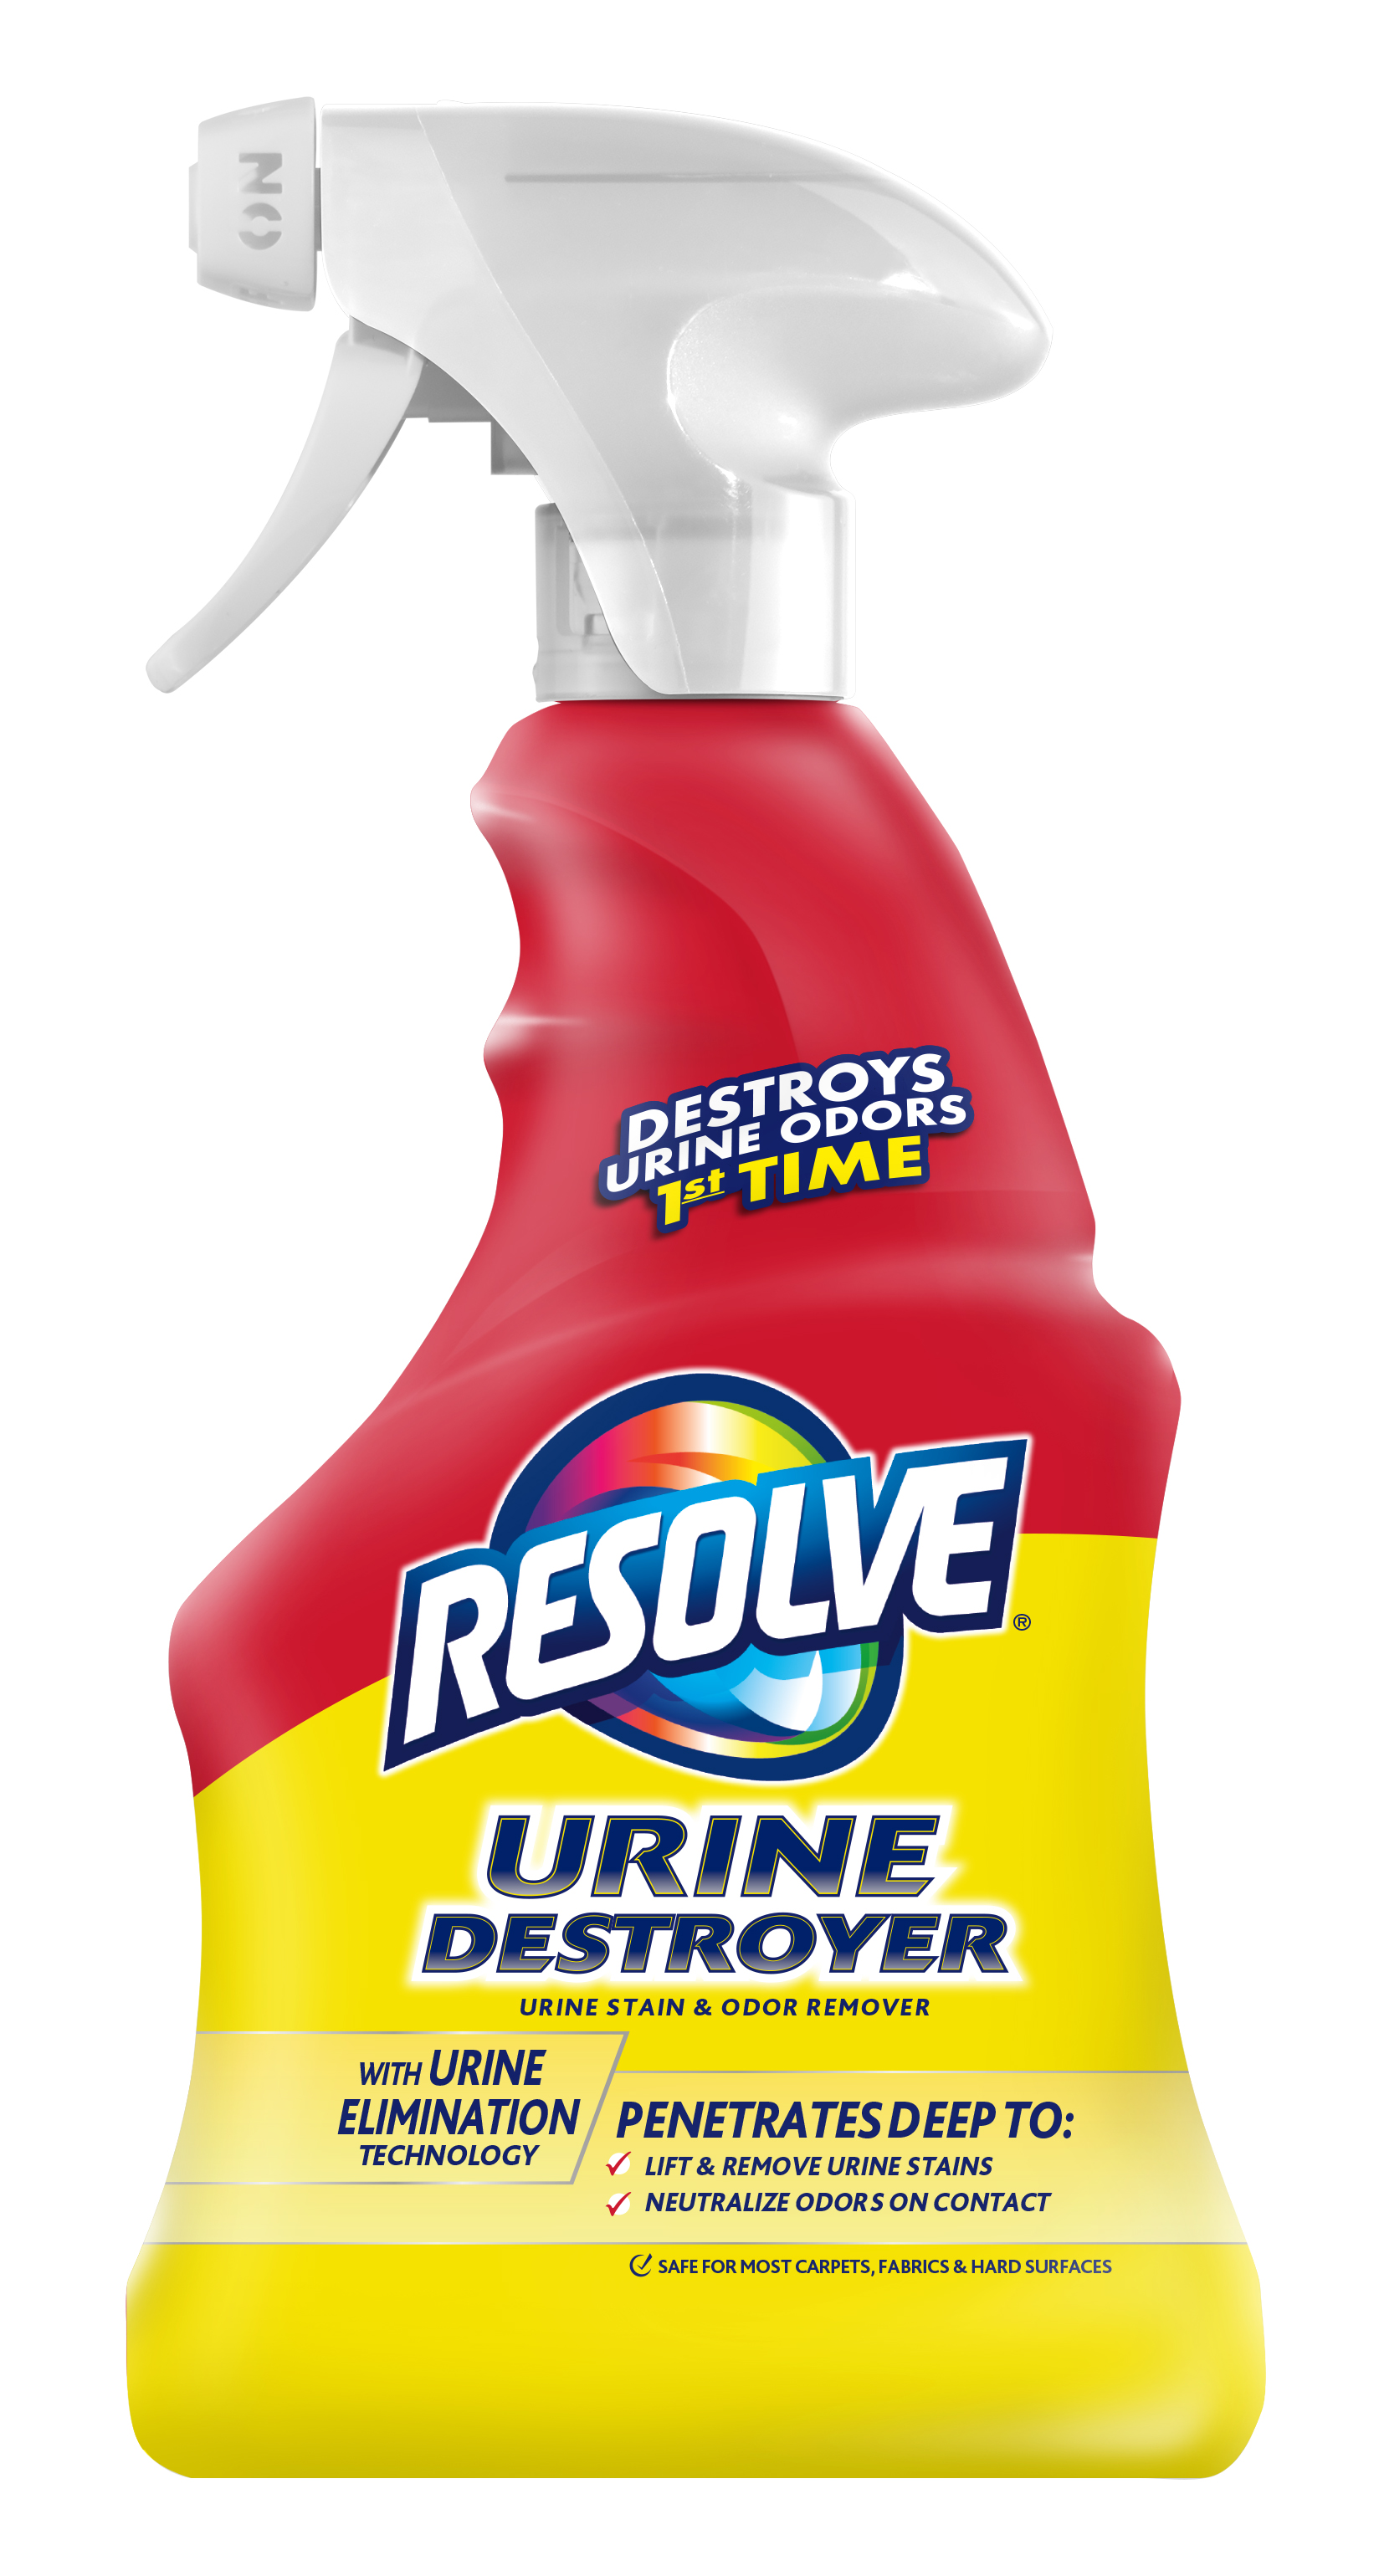 RESOLVE Urine Destroyer Stain and Odor Remover